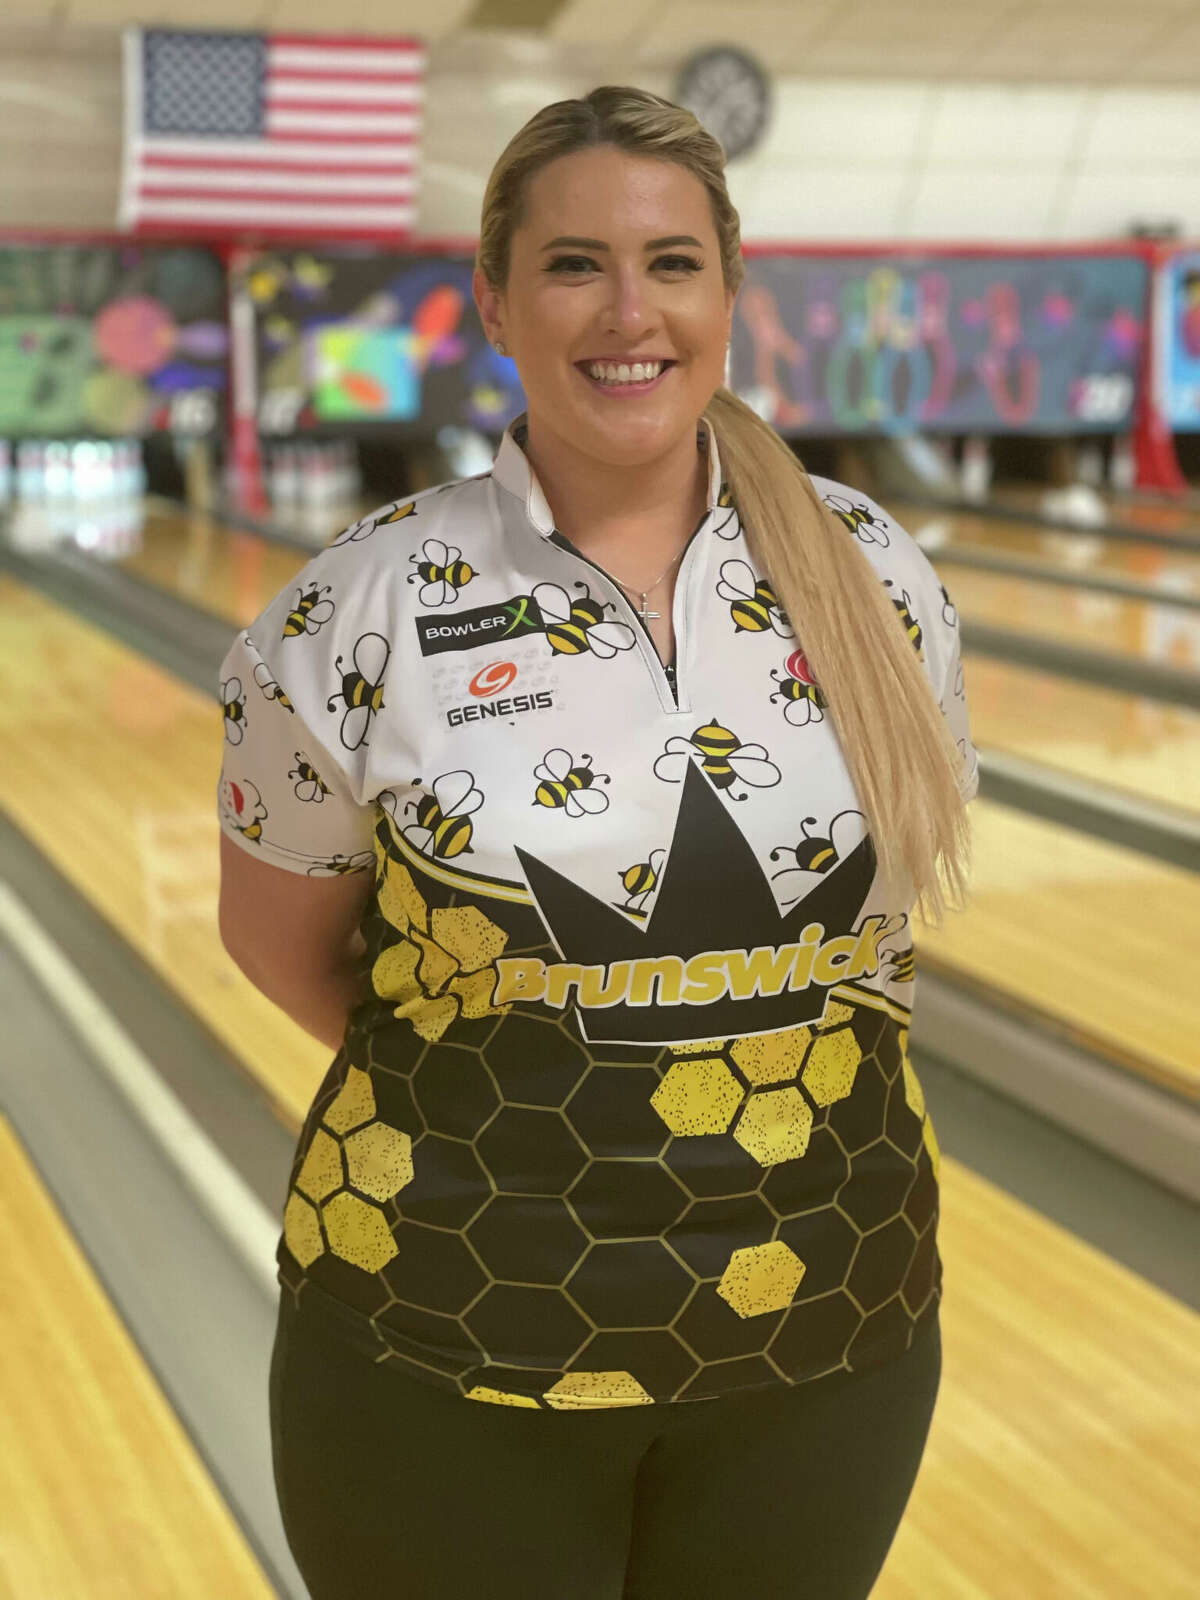 Liz Kuhlkin, a 27-year-old right-hander from Rotterdam, lost in the final of the PWBA Rockford Open to Stefanie Johnson of McKinney, Texas, 228-203 at Cherry Bowl, on Sunday, May 15, 2022.